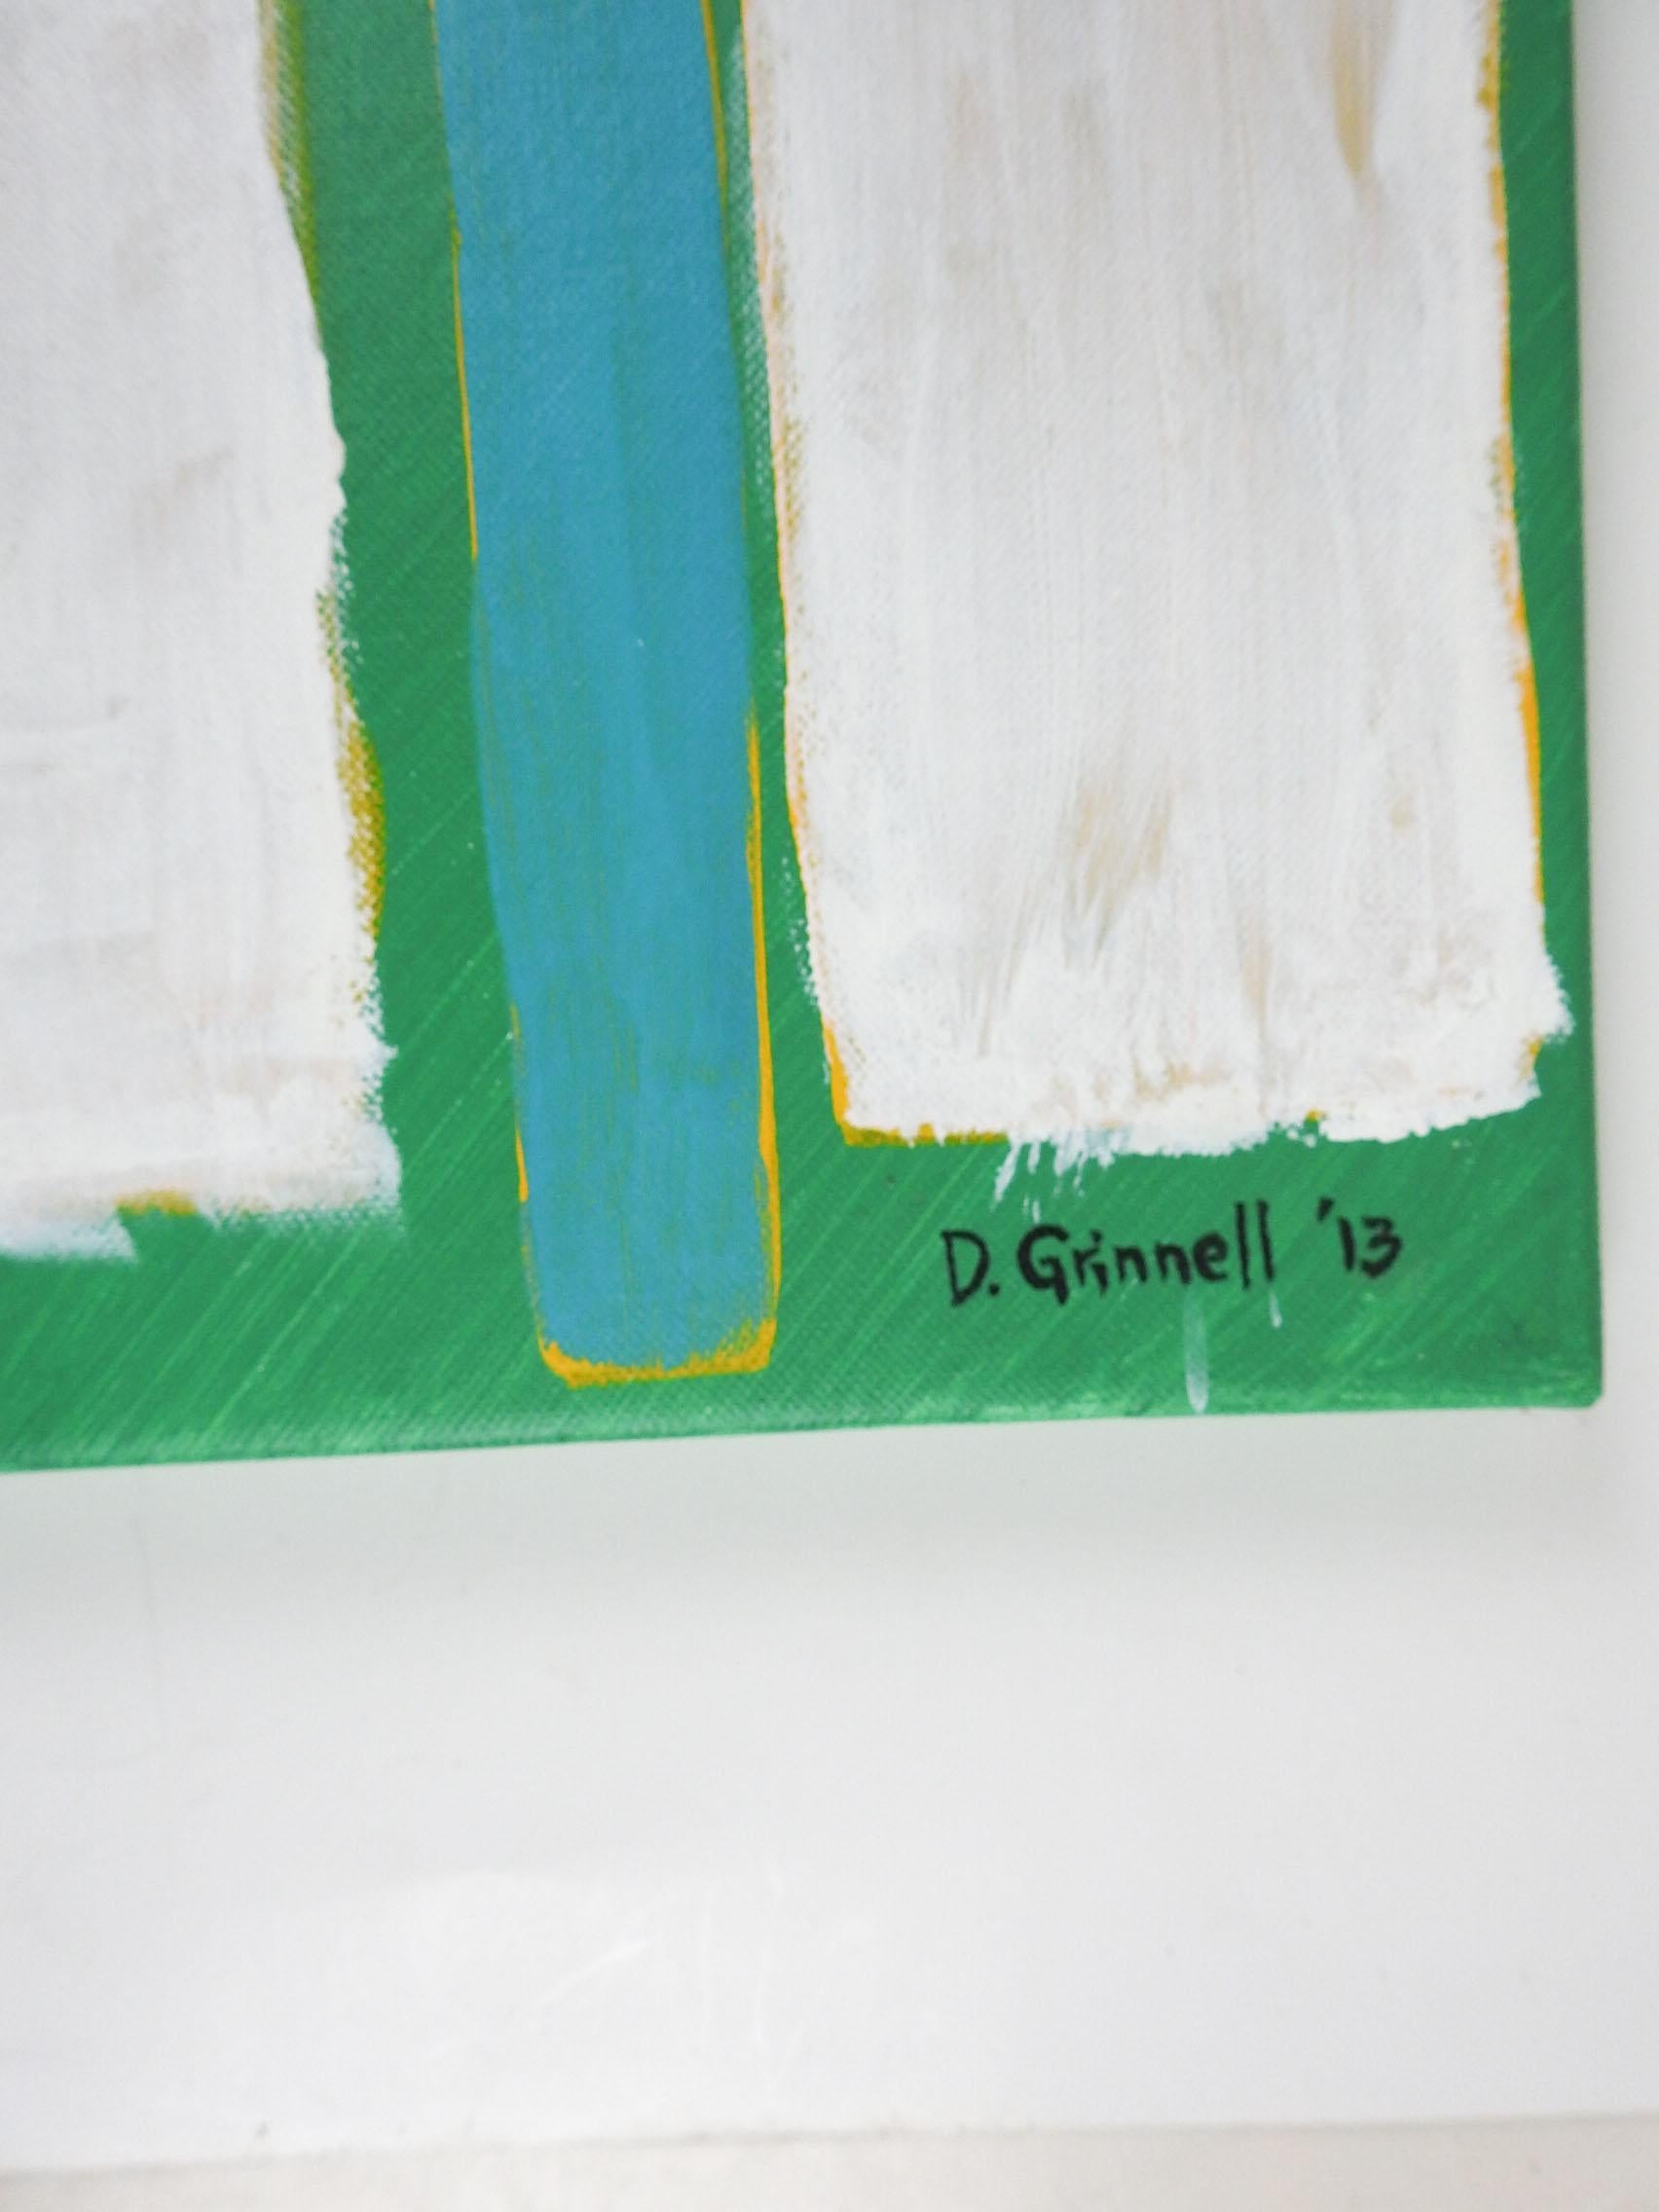 2013 abstract acrylic on canvas painting by David Grinnell (21st century) Texas. In green, blue and white. Signed lowr right corner, signed, titled Diebenkorn's Landscape on verso. Unframed, good condition.